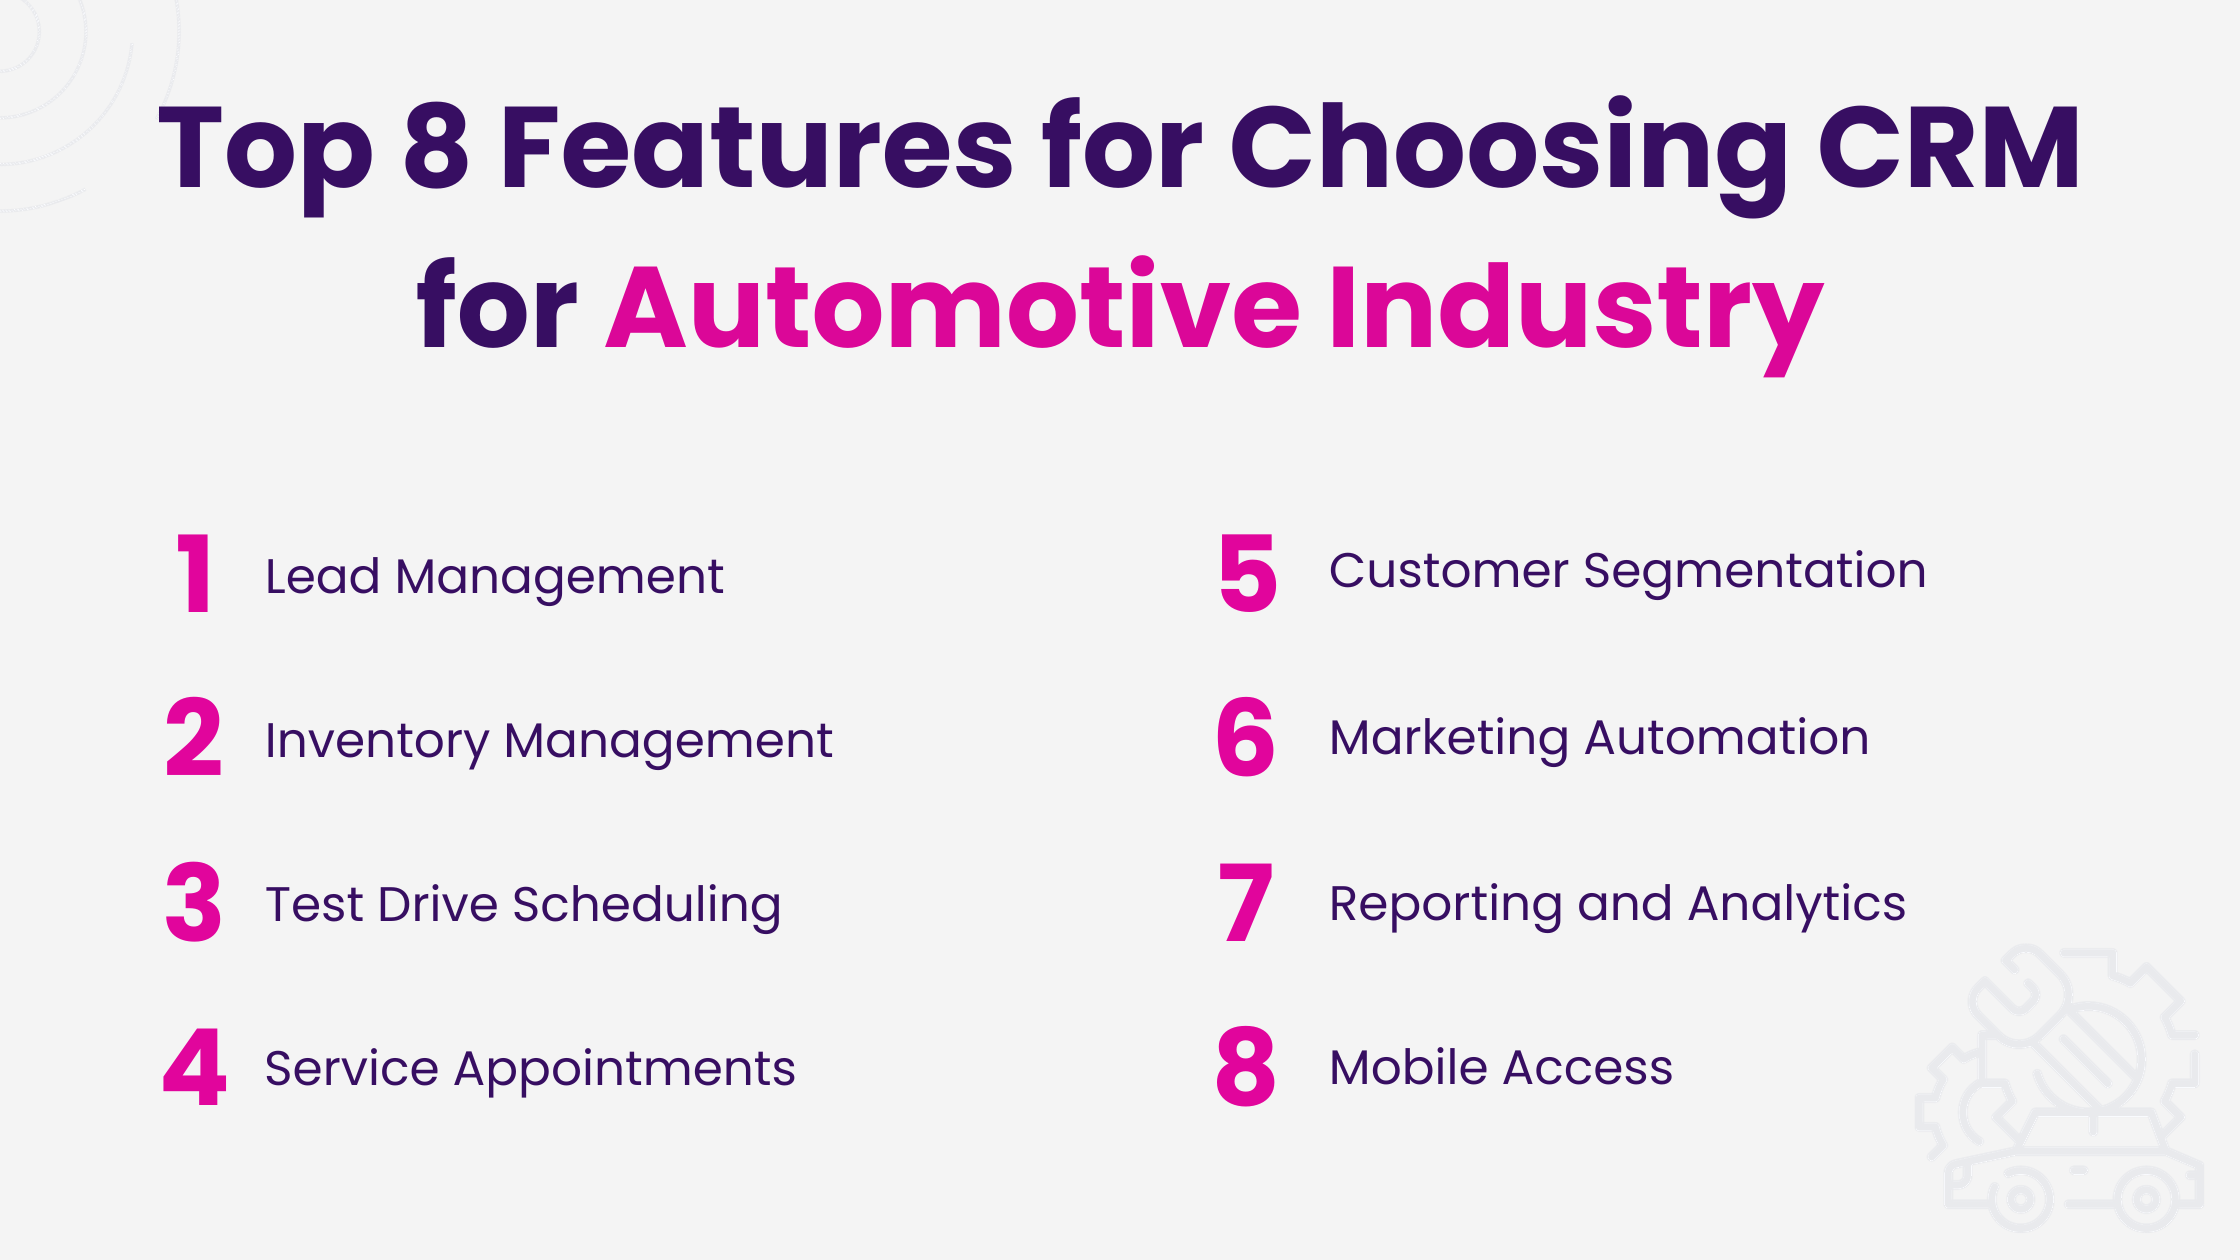 Top 8 Features for Choosing CRM for Automotive Industry